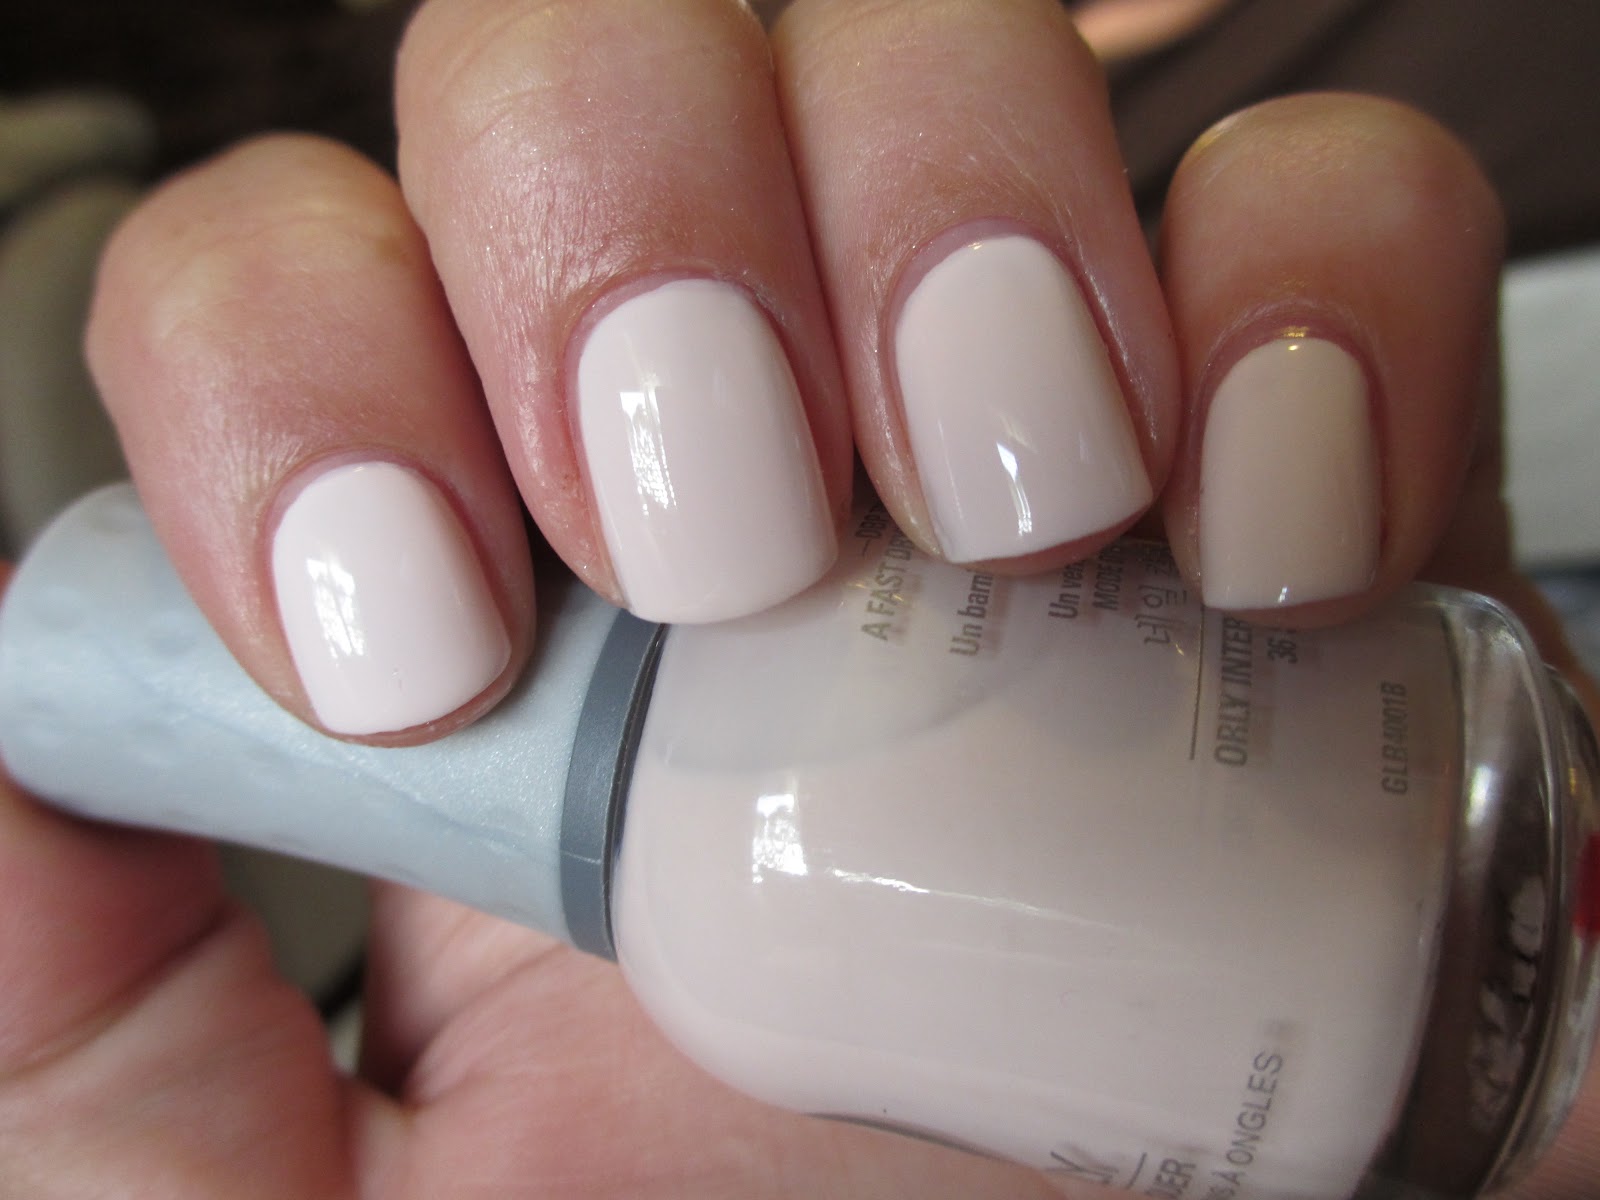 Orly Nail Lacquer, Kiss the Bride - wide 3